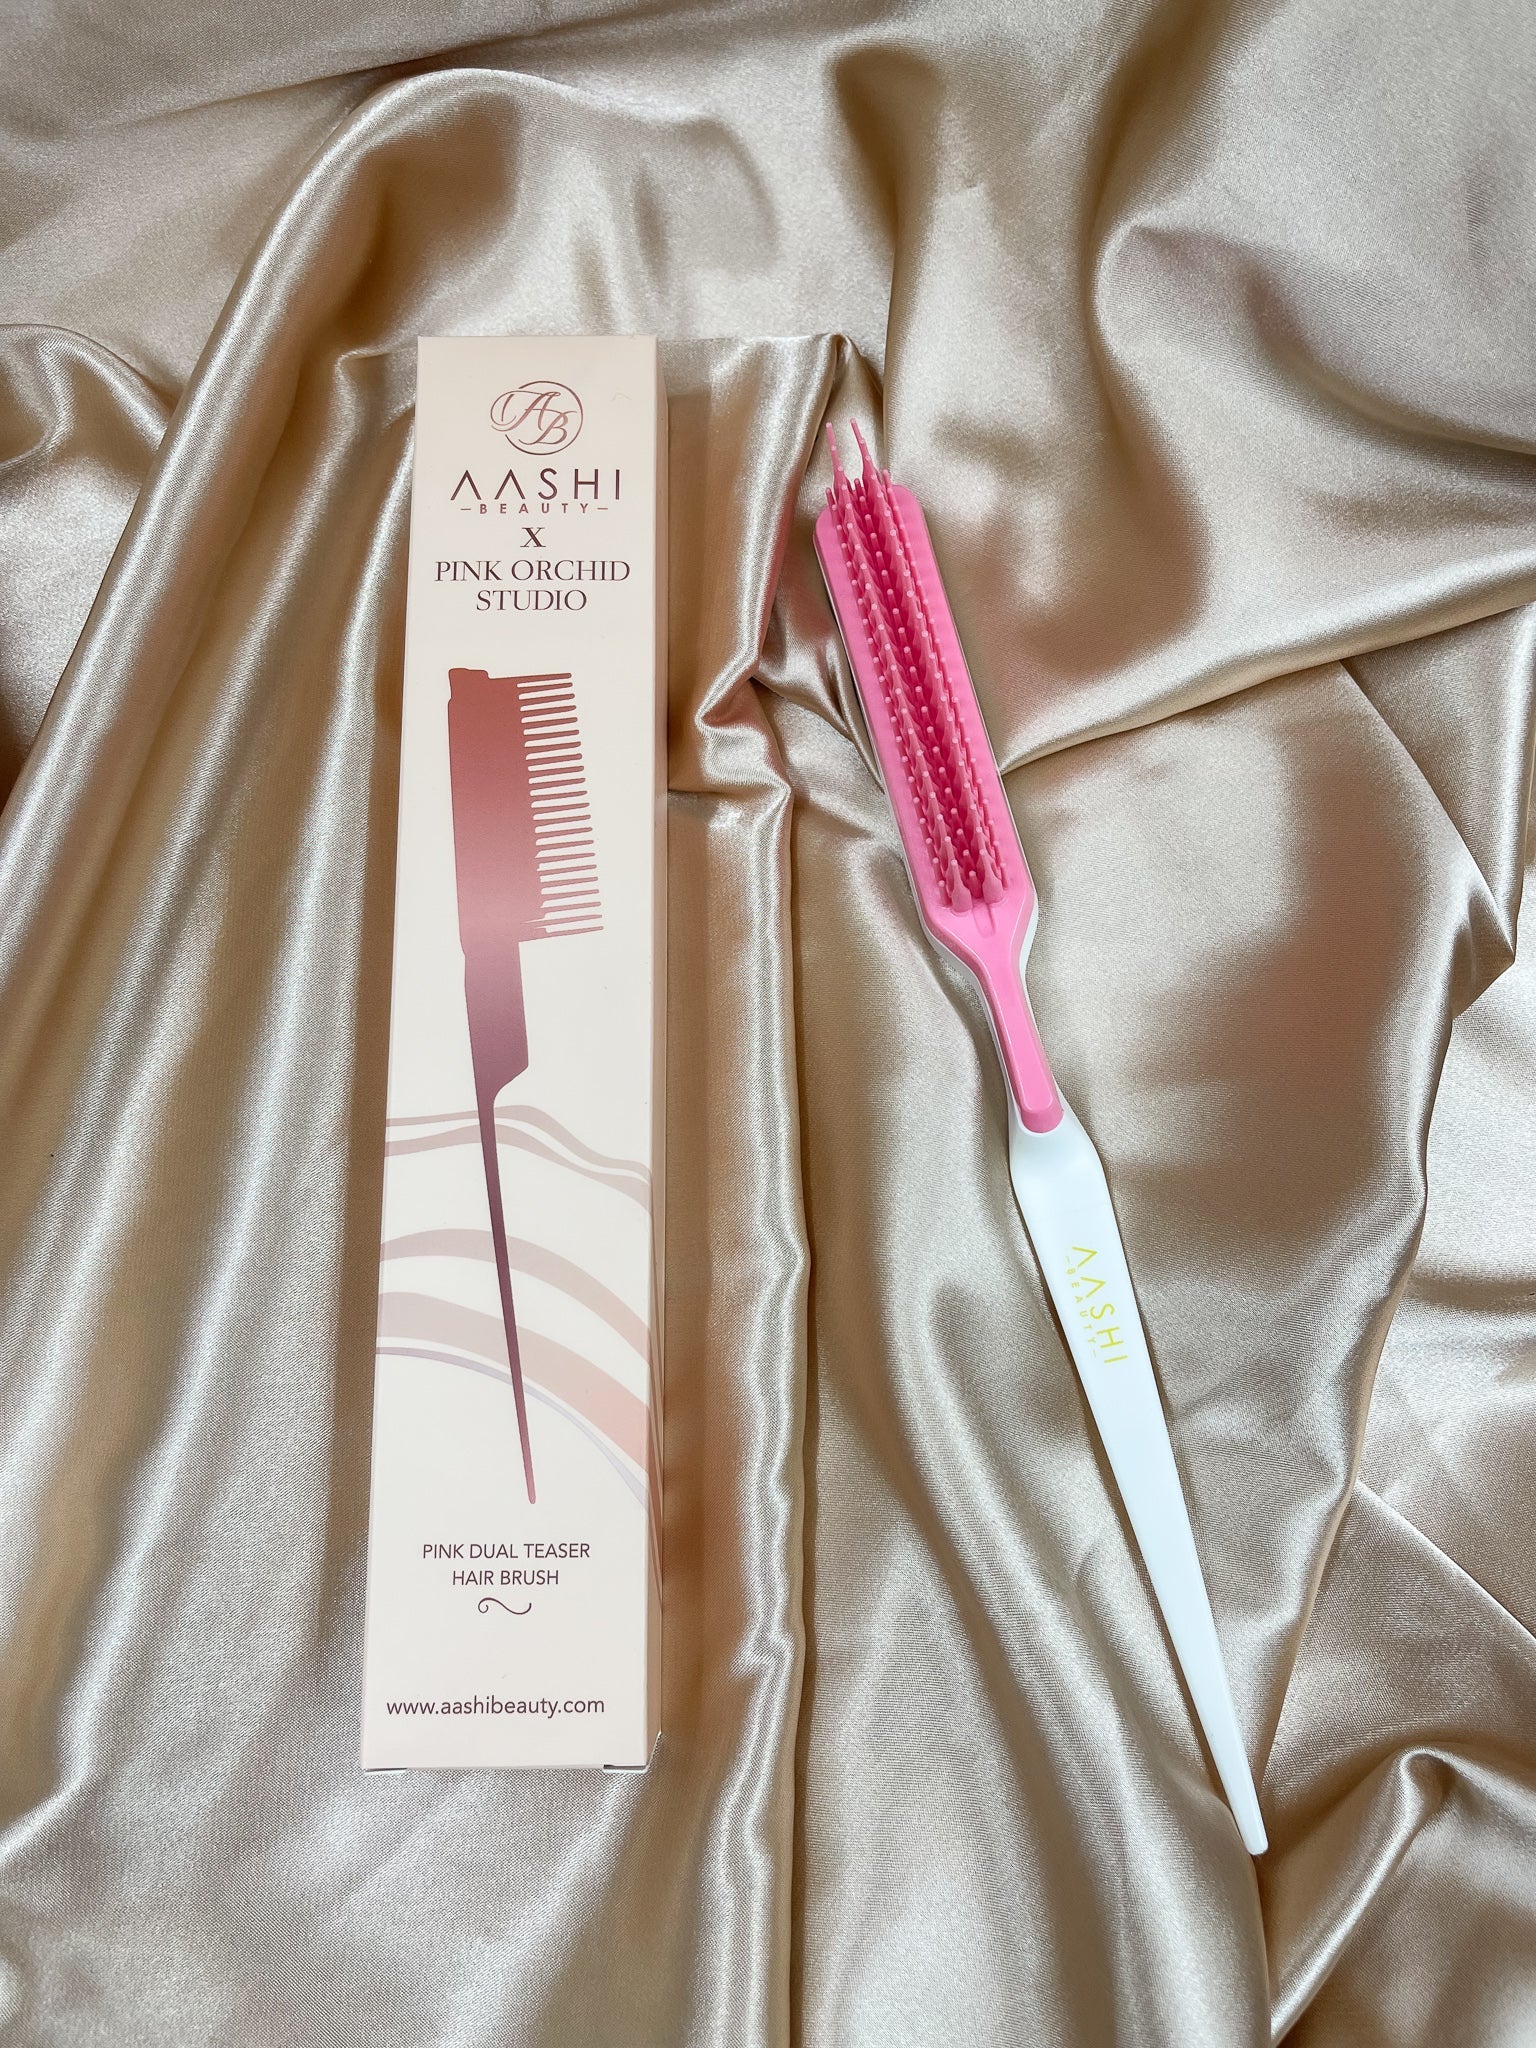 Pink Duo Teaser Hair Brush - Aashi Beauty